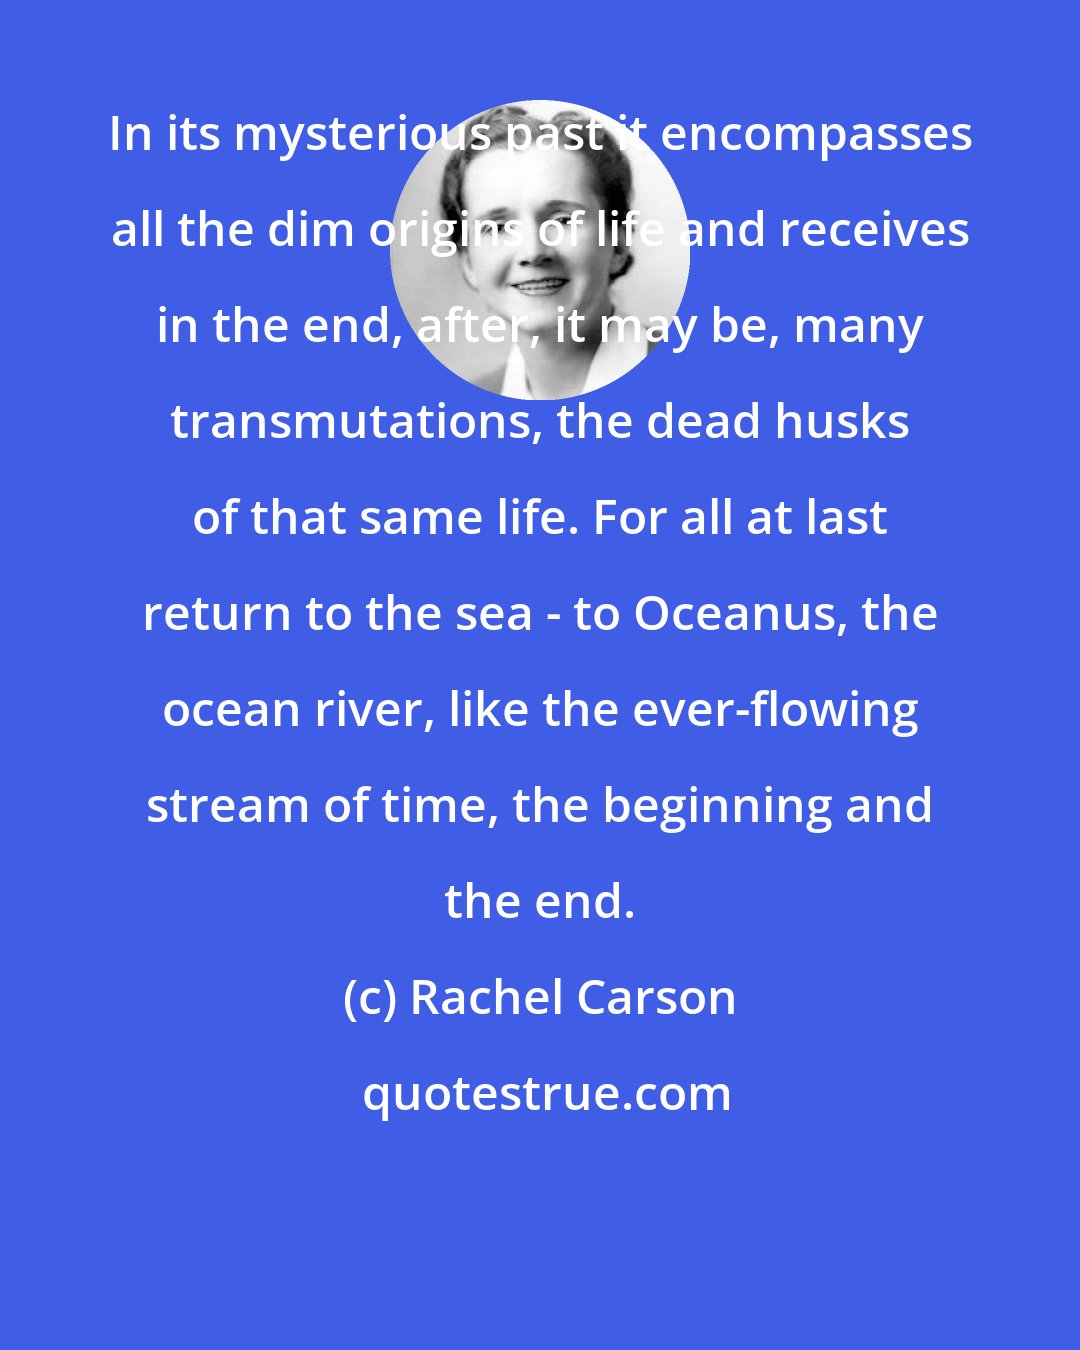 Rachel Carson: In its mysterious past it encompasses all the dim origins of life and receives in the end, after, it may be, many transmutations, the dead husks of that same life. For all at last return to the sea - to Oceanus, the ocean river, like the ever-flowing stream of time, the beginning and the end.